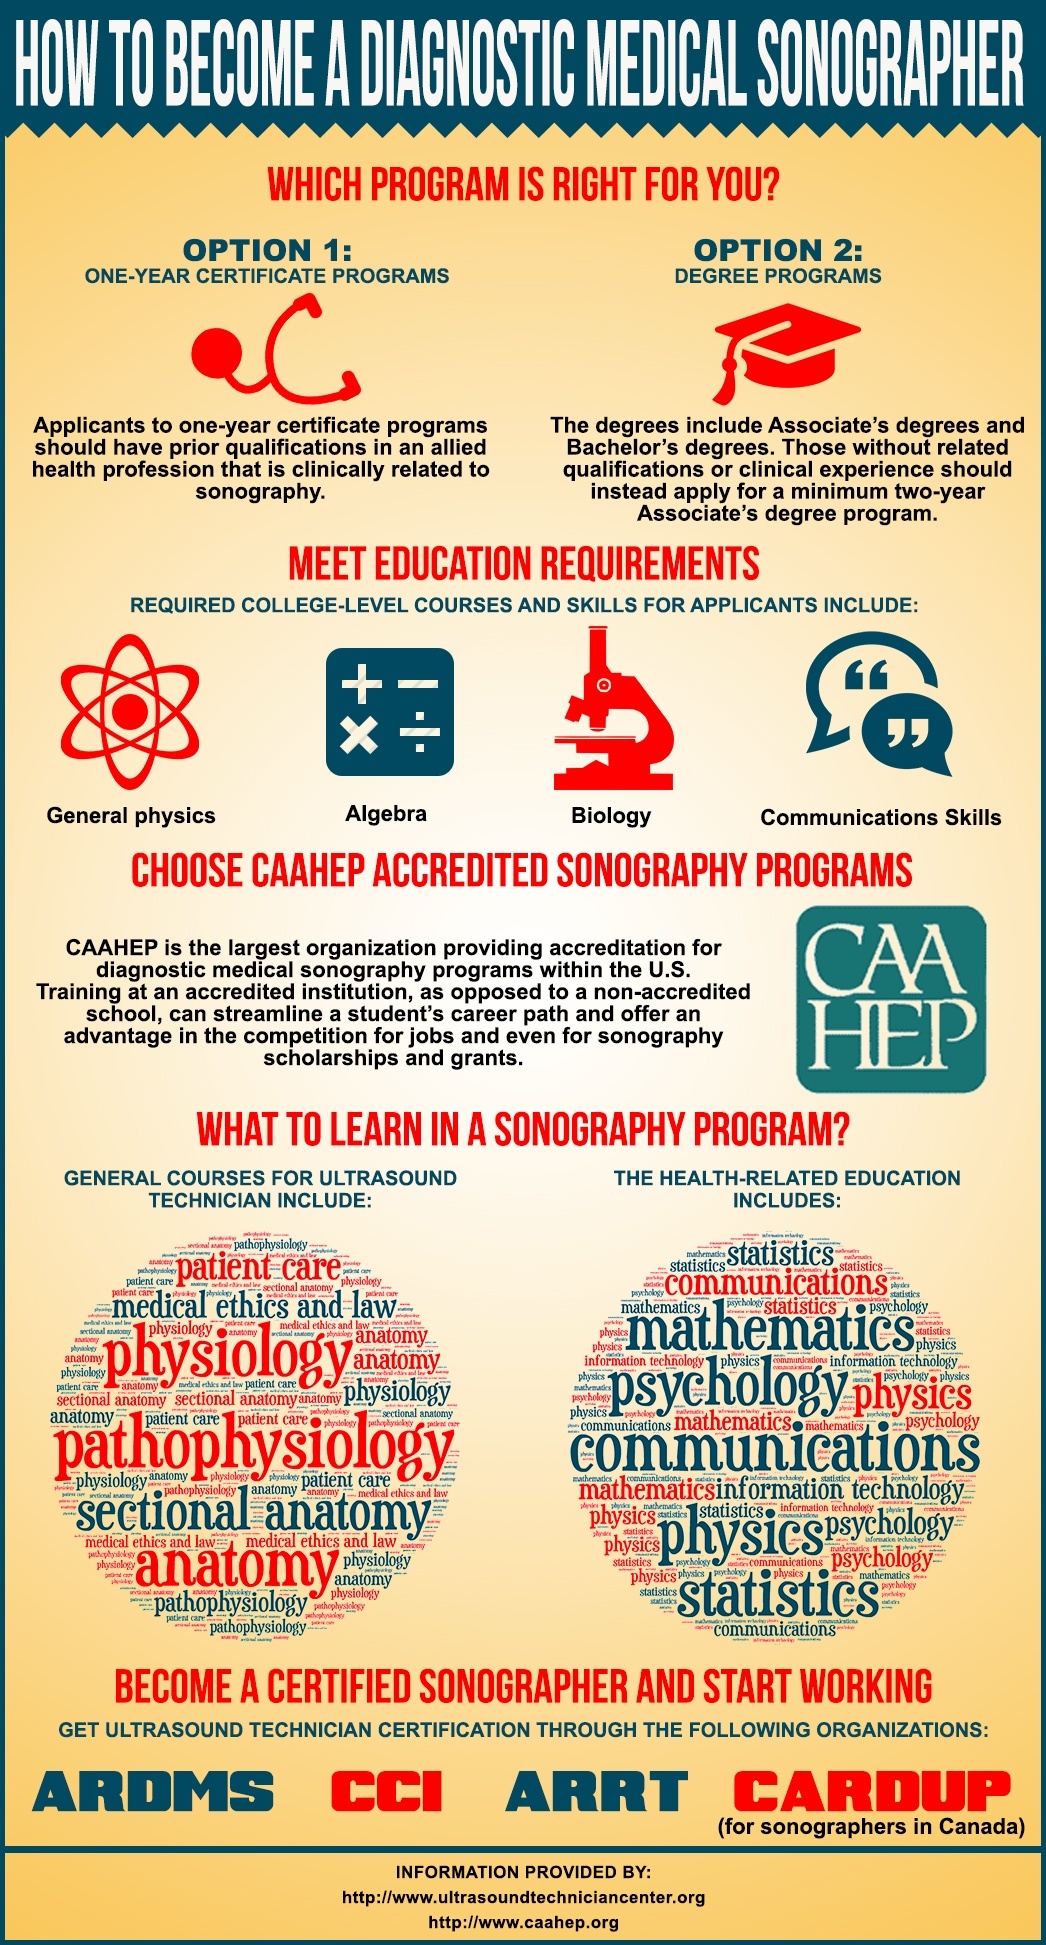 How to Become a Diagnostic Medical Sonographer